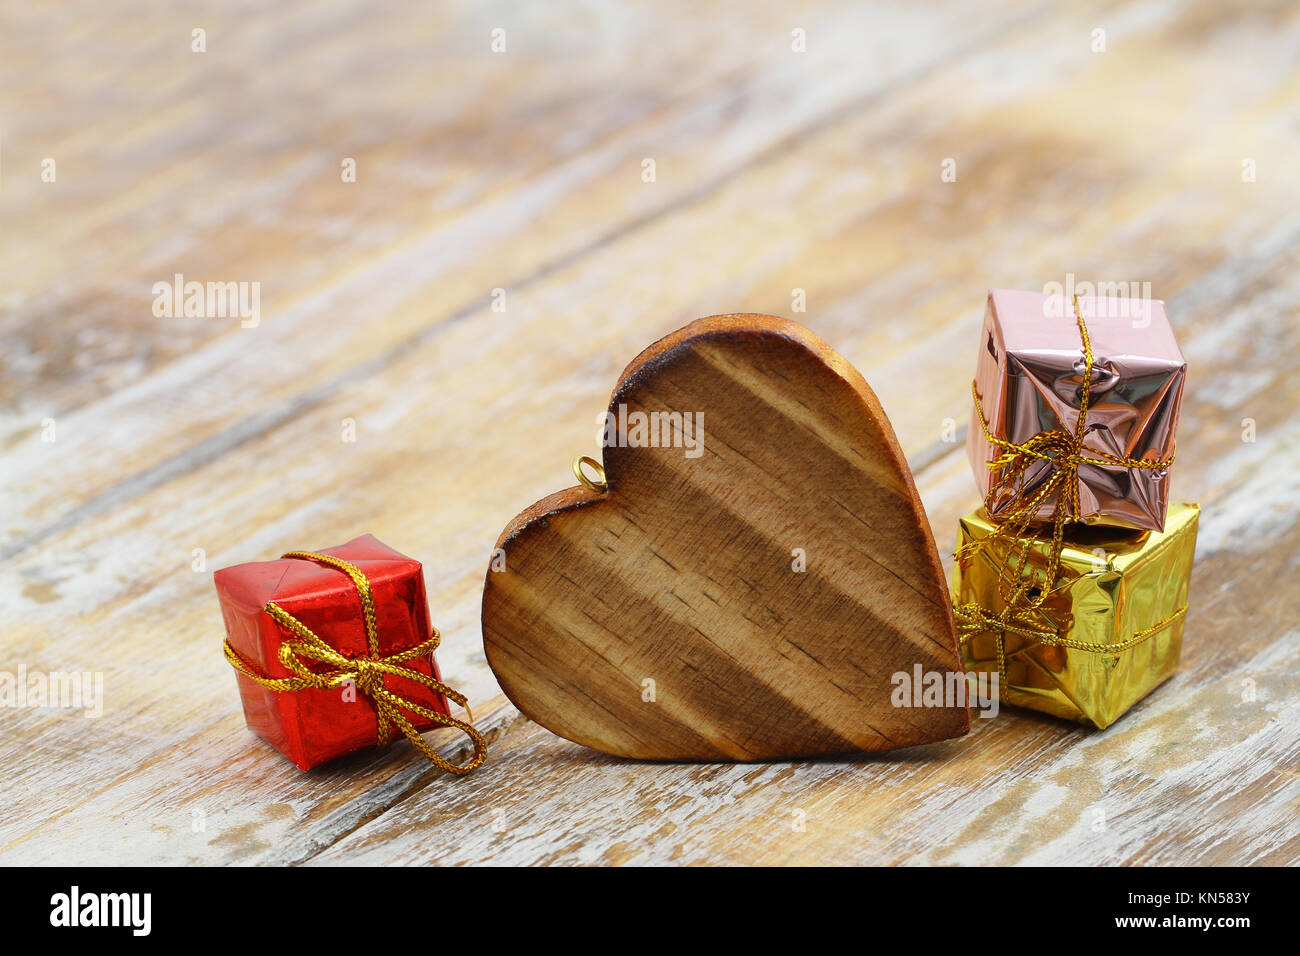 Wooden heart and shiny Christmas gifts on wooden surface with copy space Stock Photo